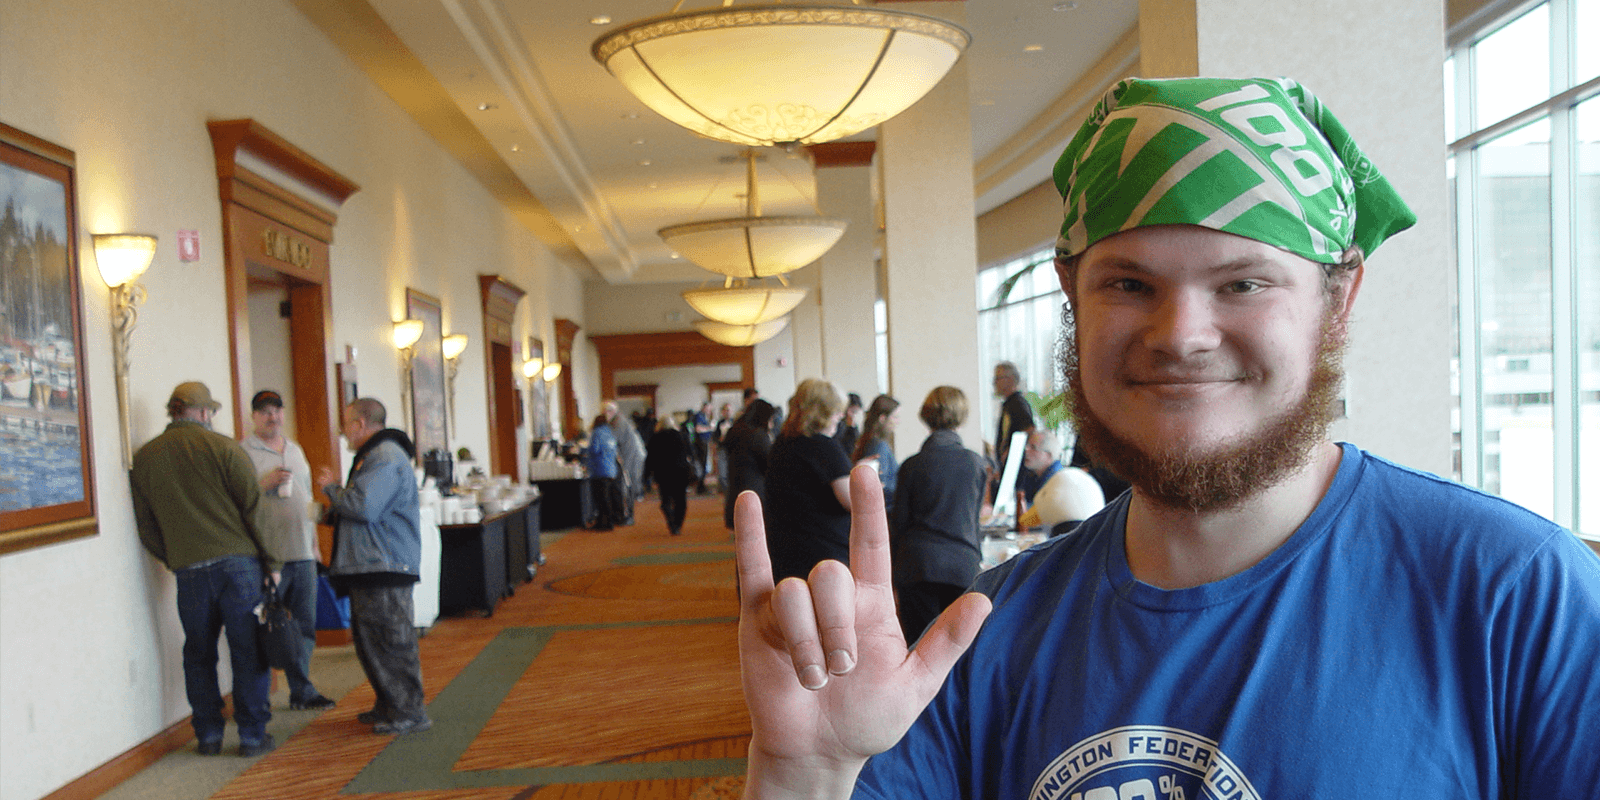 Deaf AFSCME Member in WA Wears Armor of Empathy to Fight for Others